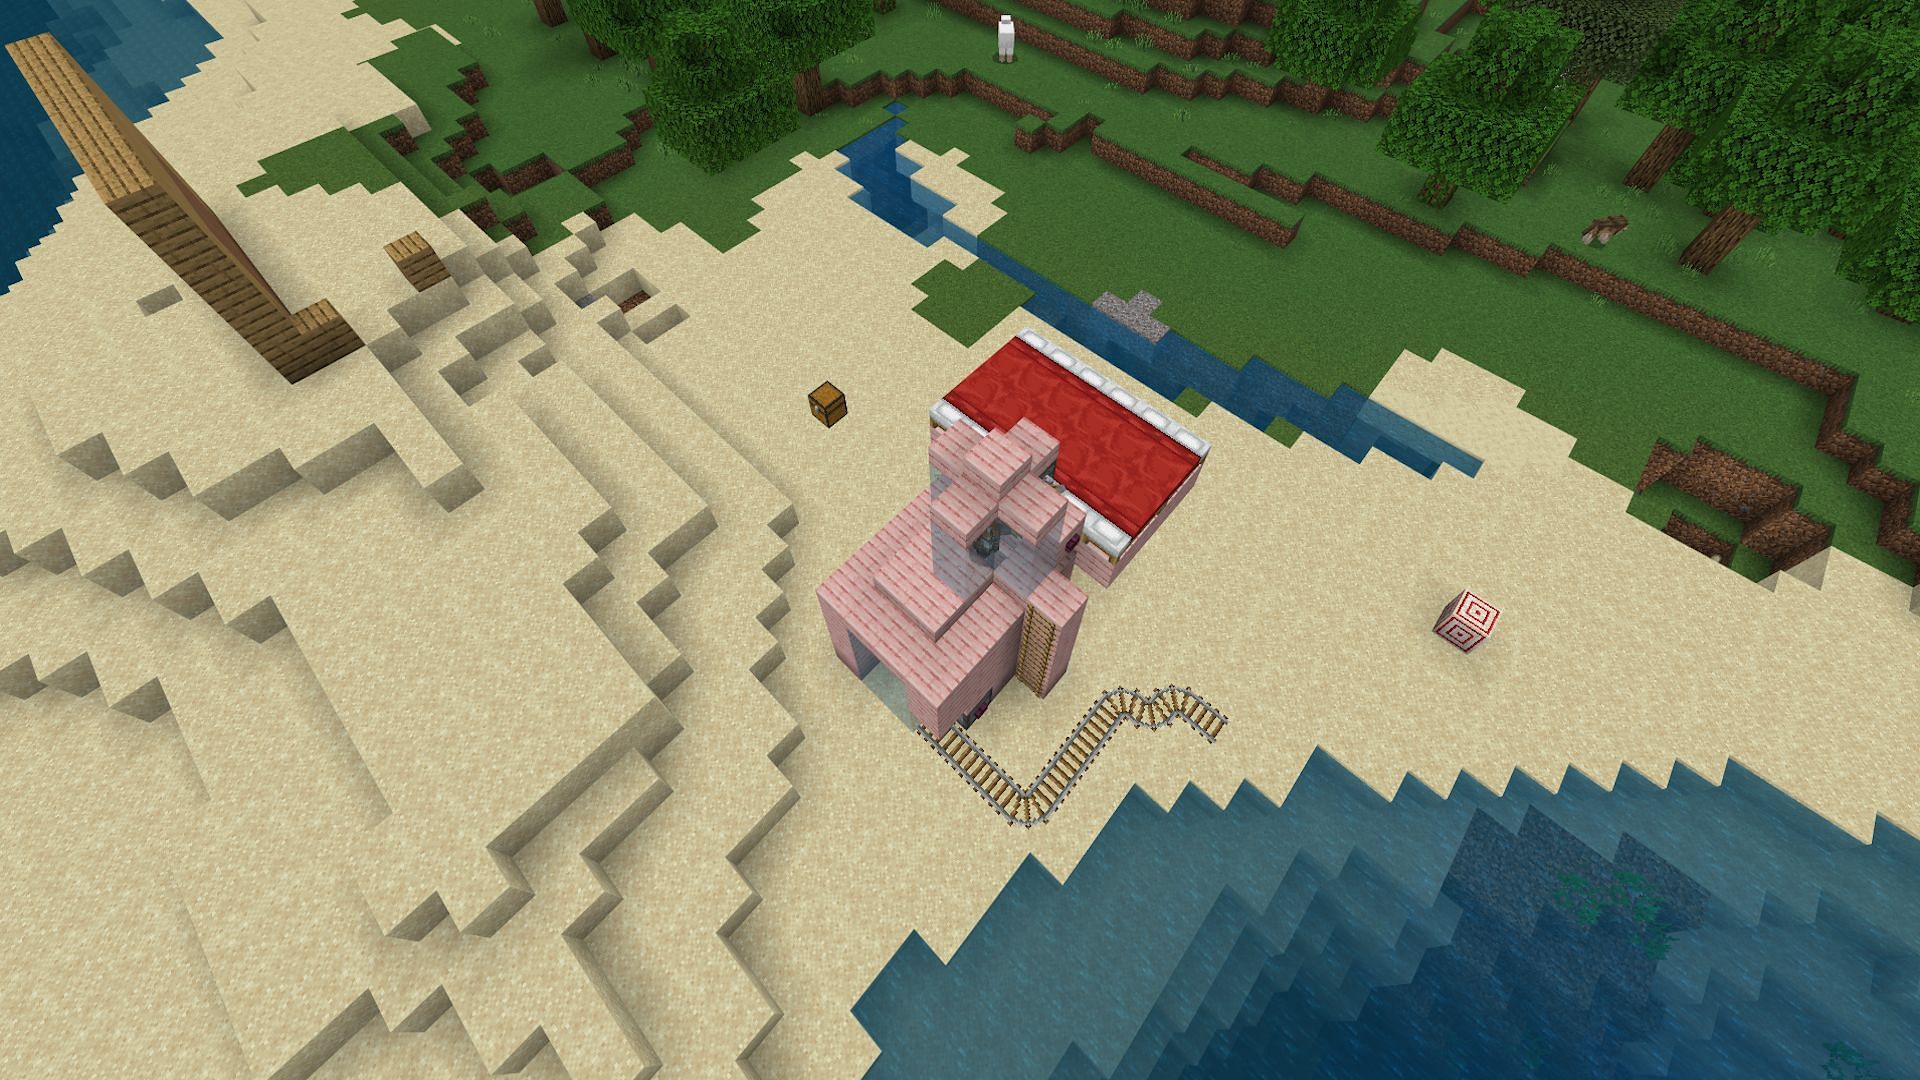 The farm&#039;s compact size means it can fit almost anywhere (Image via Mojang)